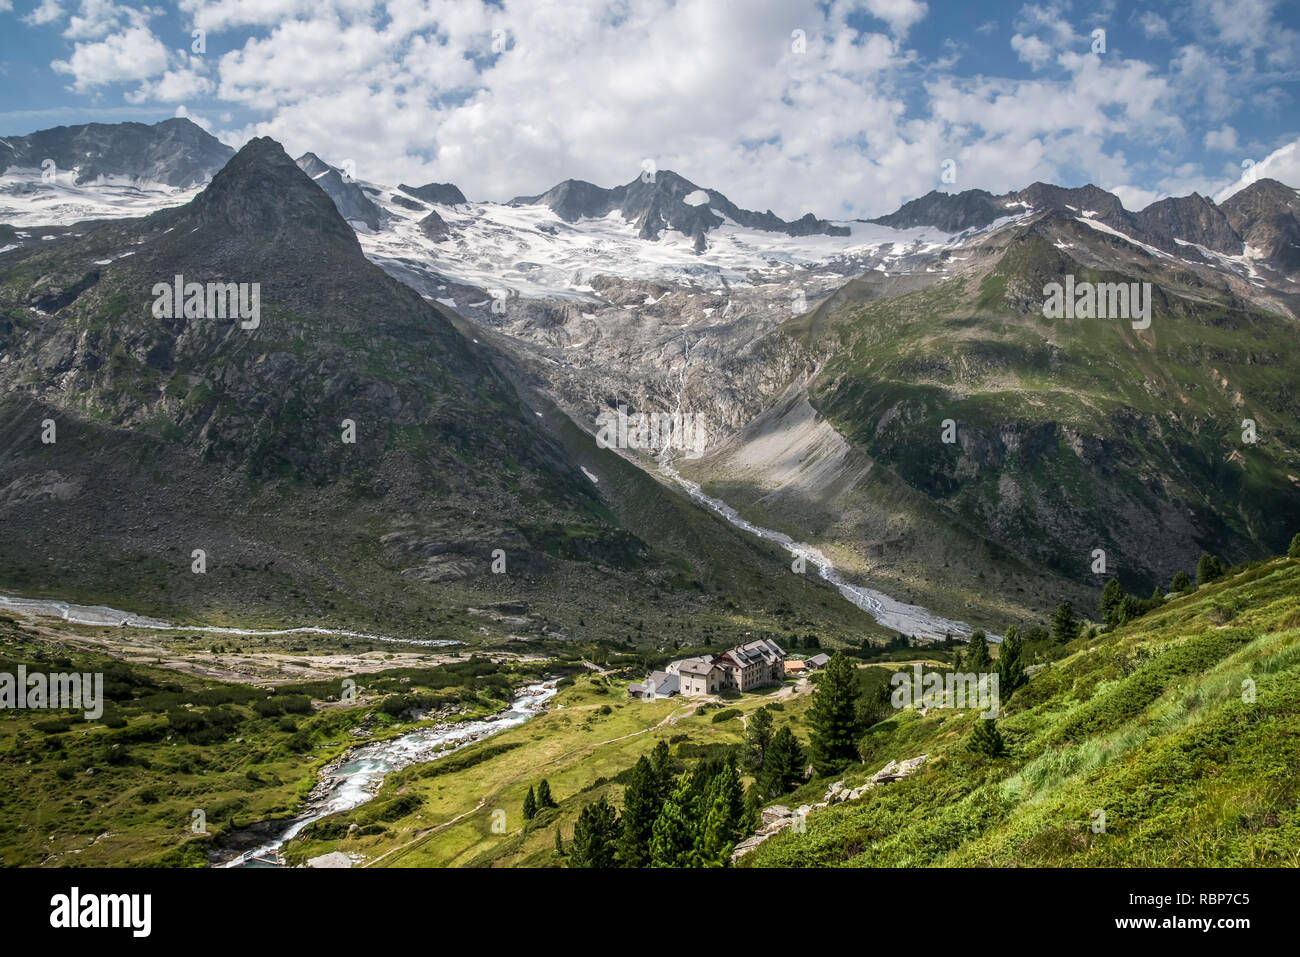 Berliner Hut mountain refuge in the Zillertal Alps of the Tyrol near the resort town of Mayrhofen in Austria Stock Photo